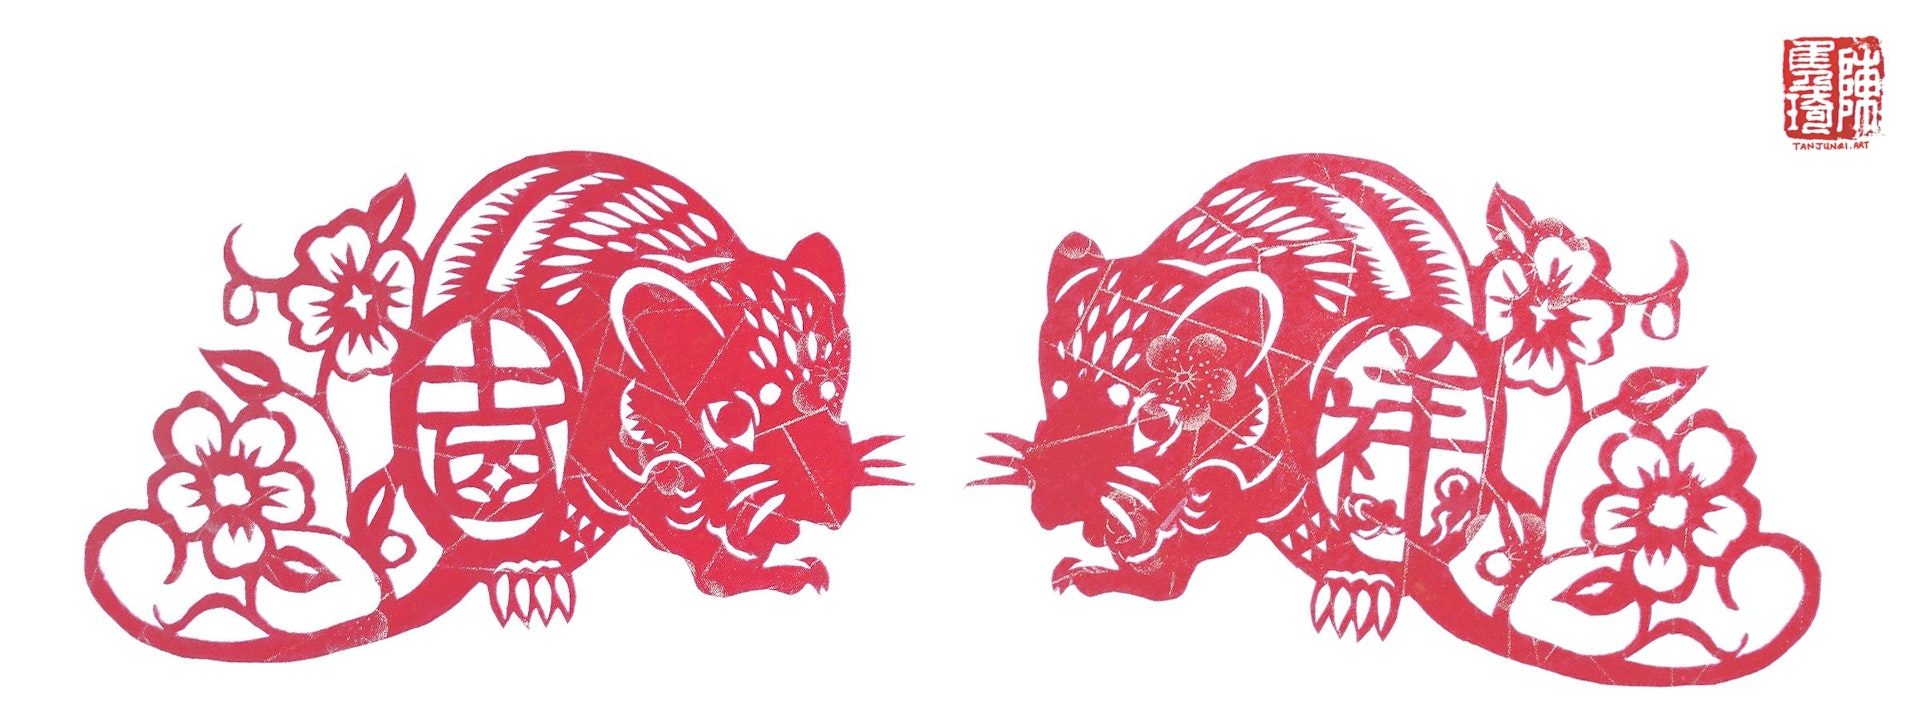 Two mirror-image chinese papercuts of rats crouching and nibbling on food. Decorative flowers and the chinese words for lucky and auspicious adorn their legs and tail.